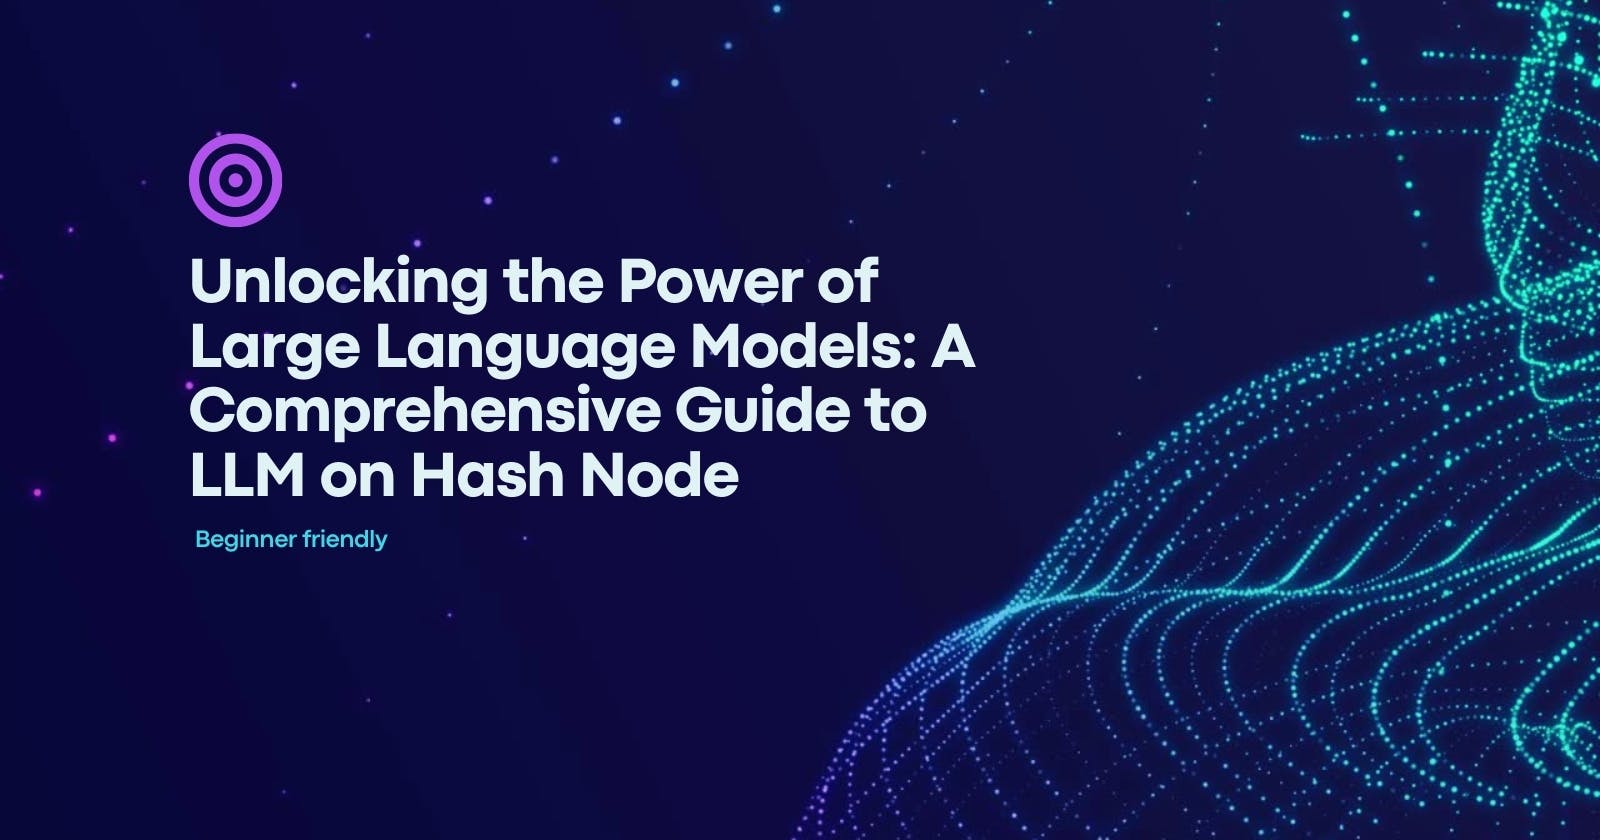 Unlocking the Power of Large Language Models: A Comprehensive Guide to LLM on Hash Node